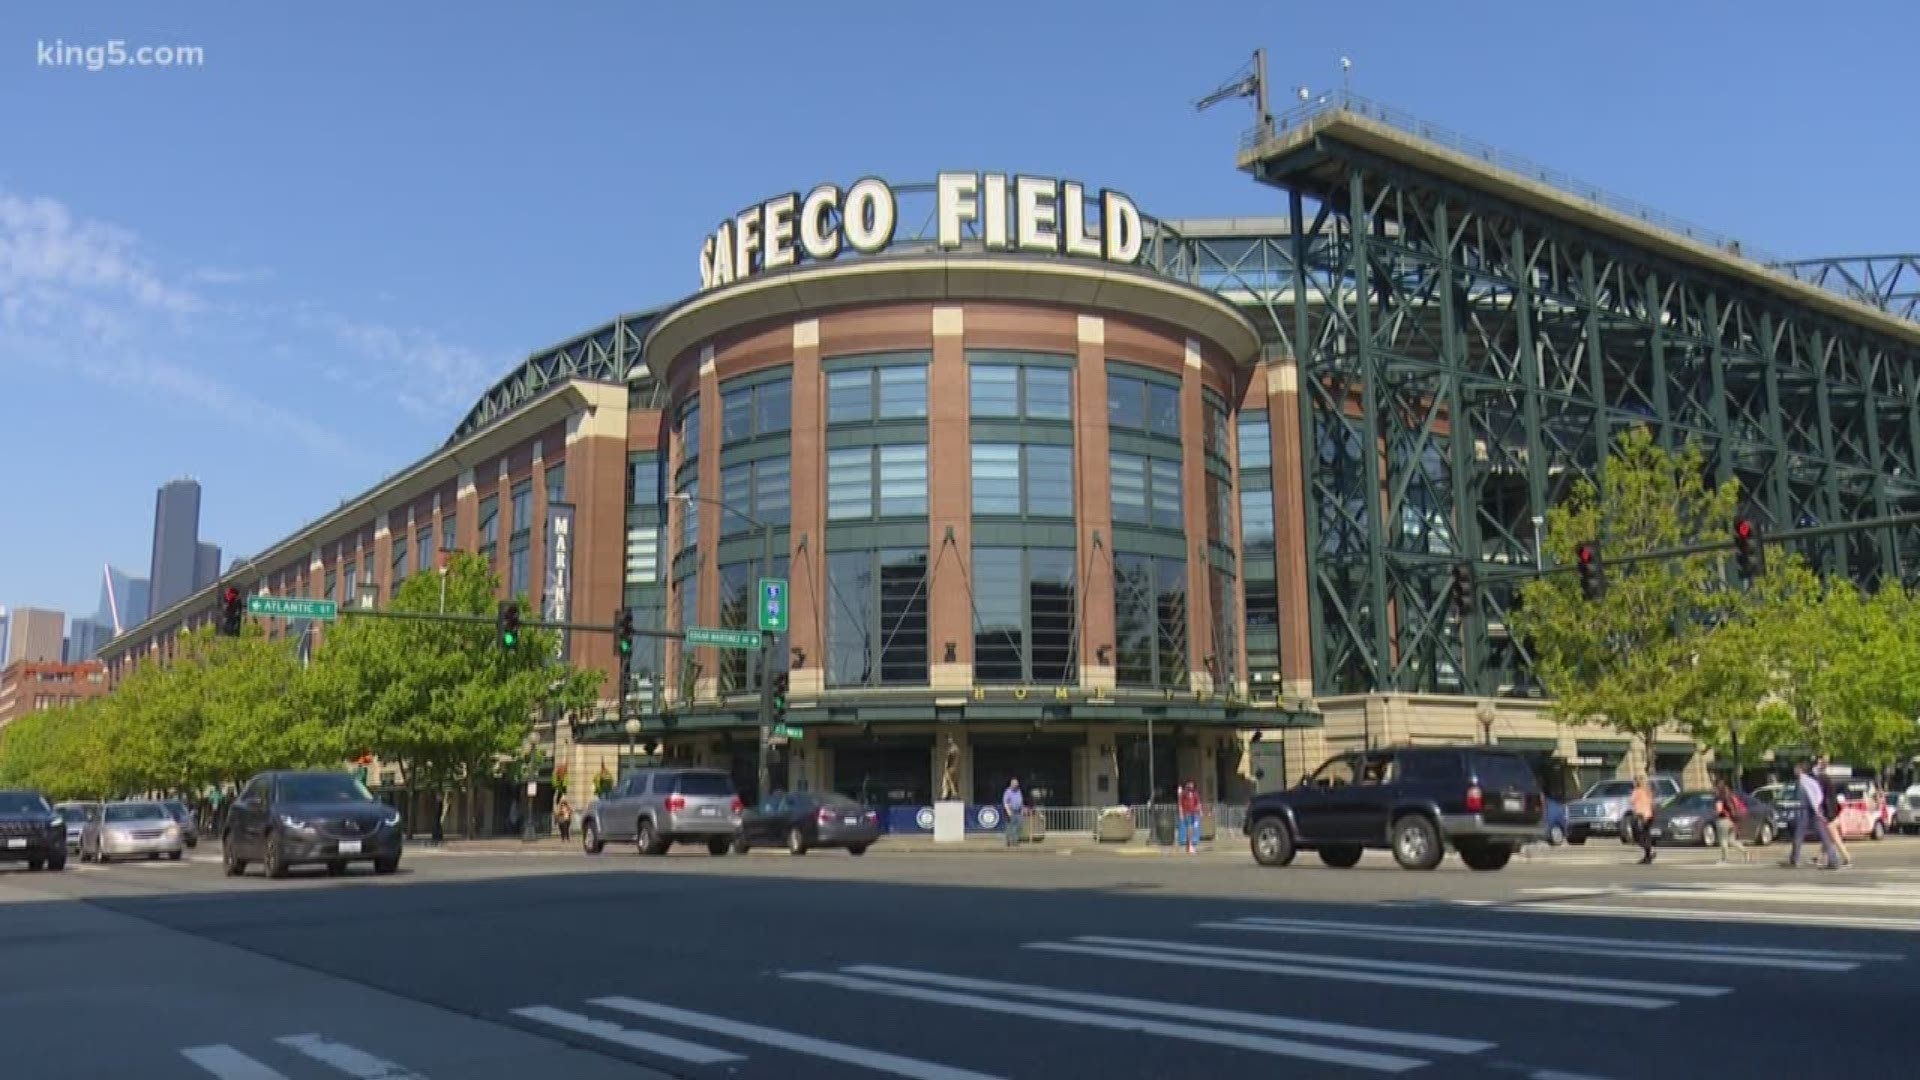 King County is moving forward with a compromise plan to use $135 million in public funds for repairs at Safeco Field.